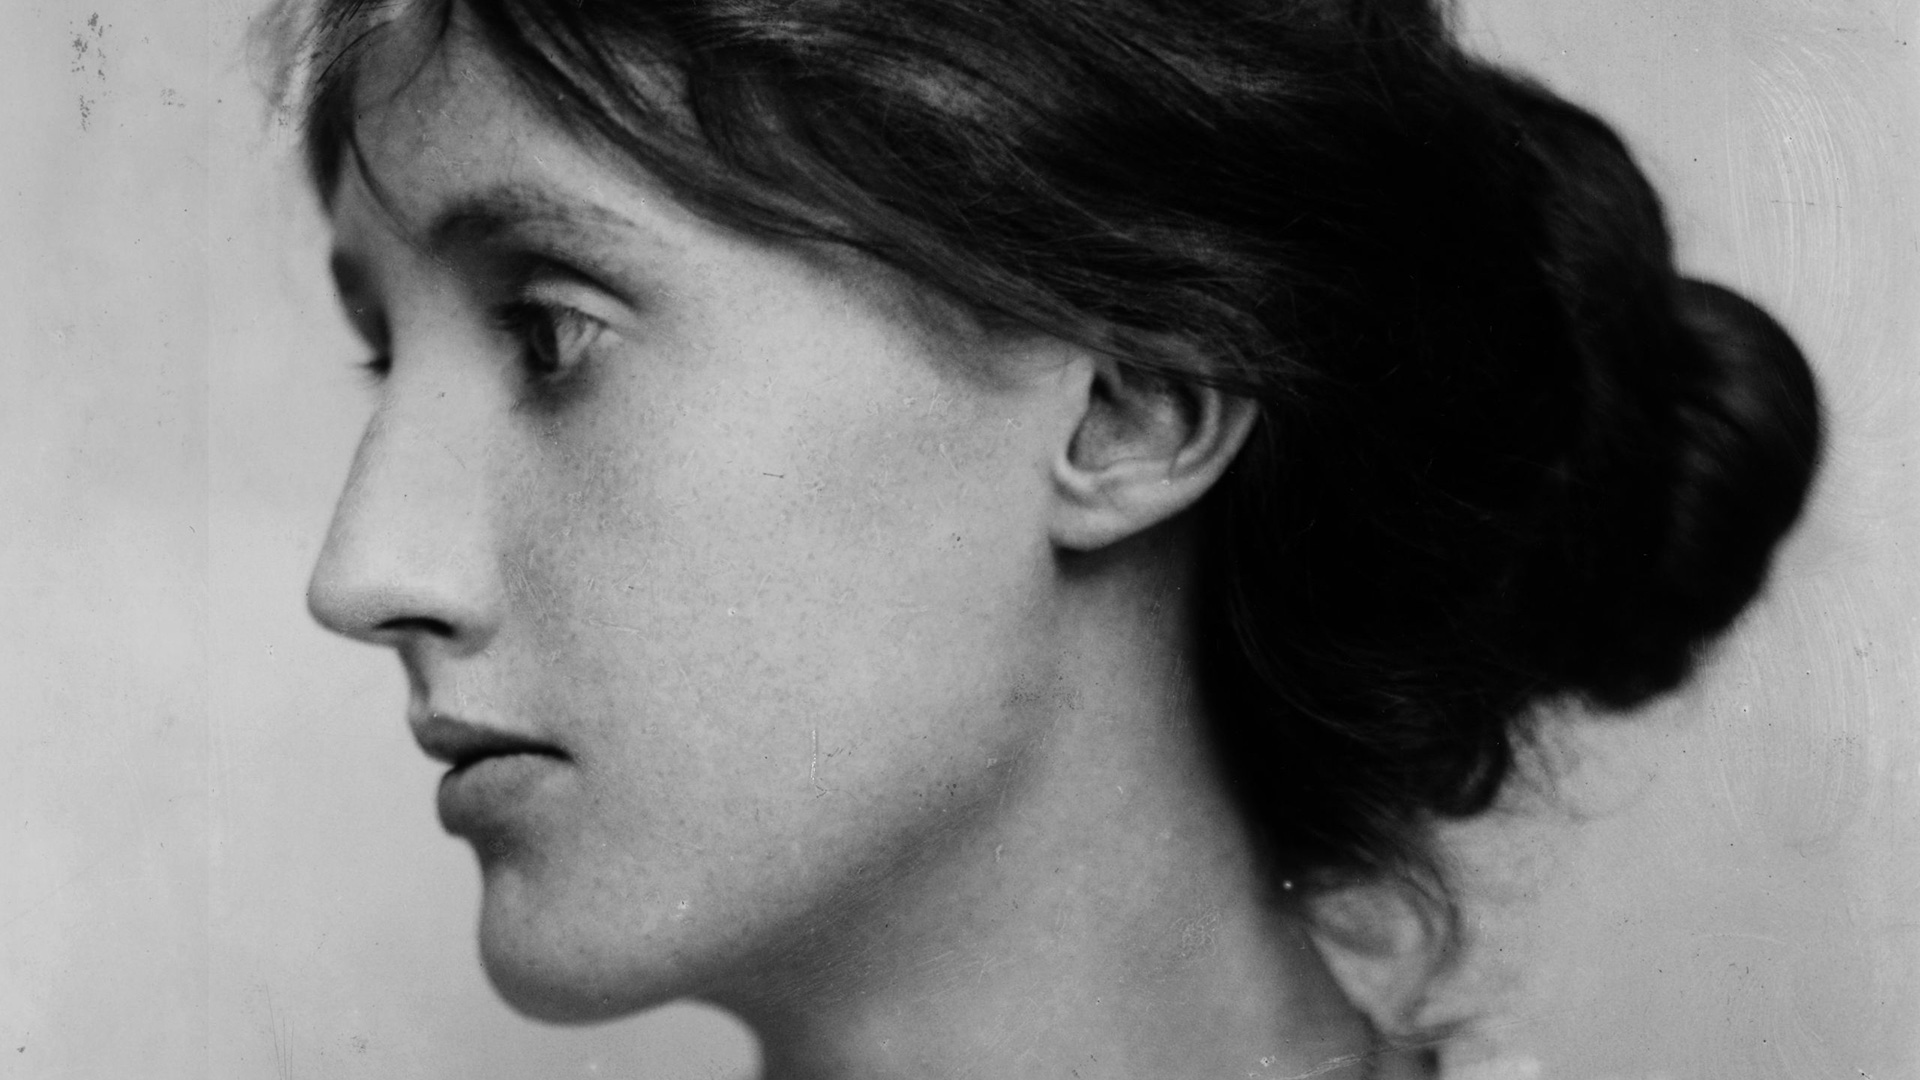 May 14, 1925: “Mrs. Dalloway” By Virginia Woolf Was Published